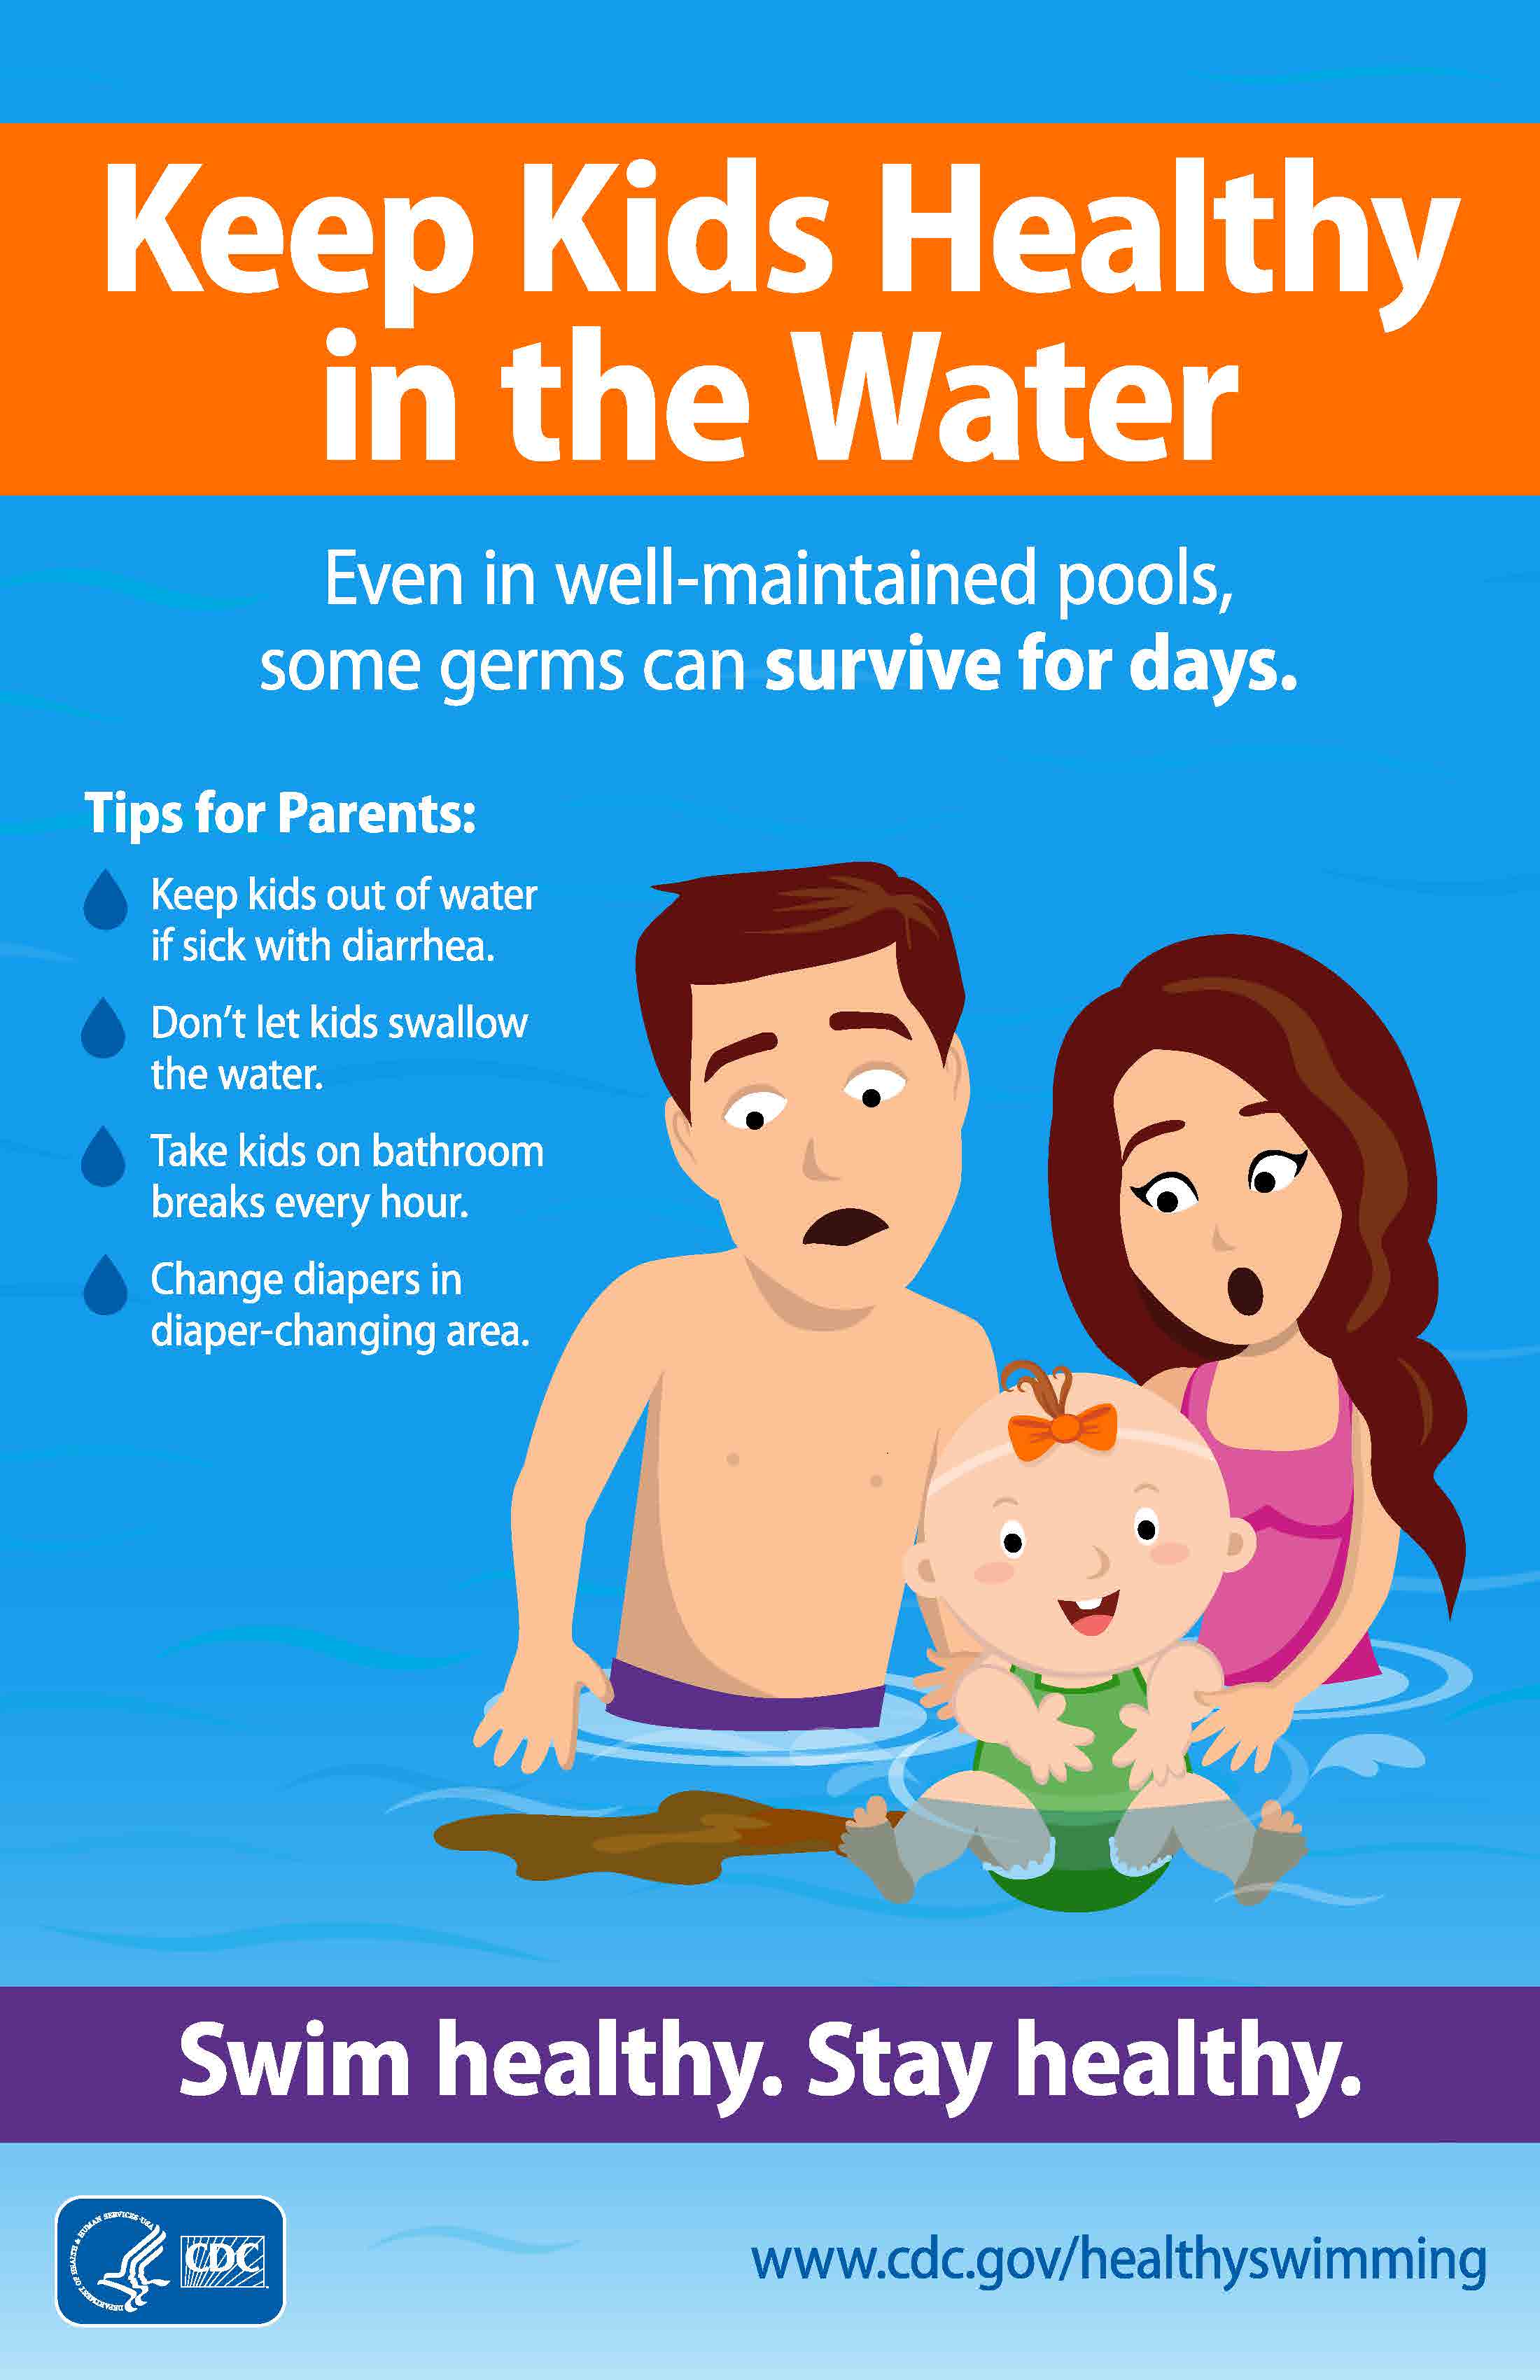 Keep Kids Healthy in the Water poster